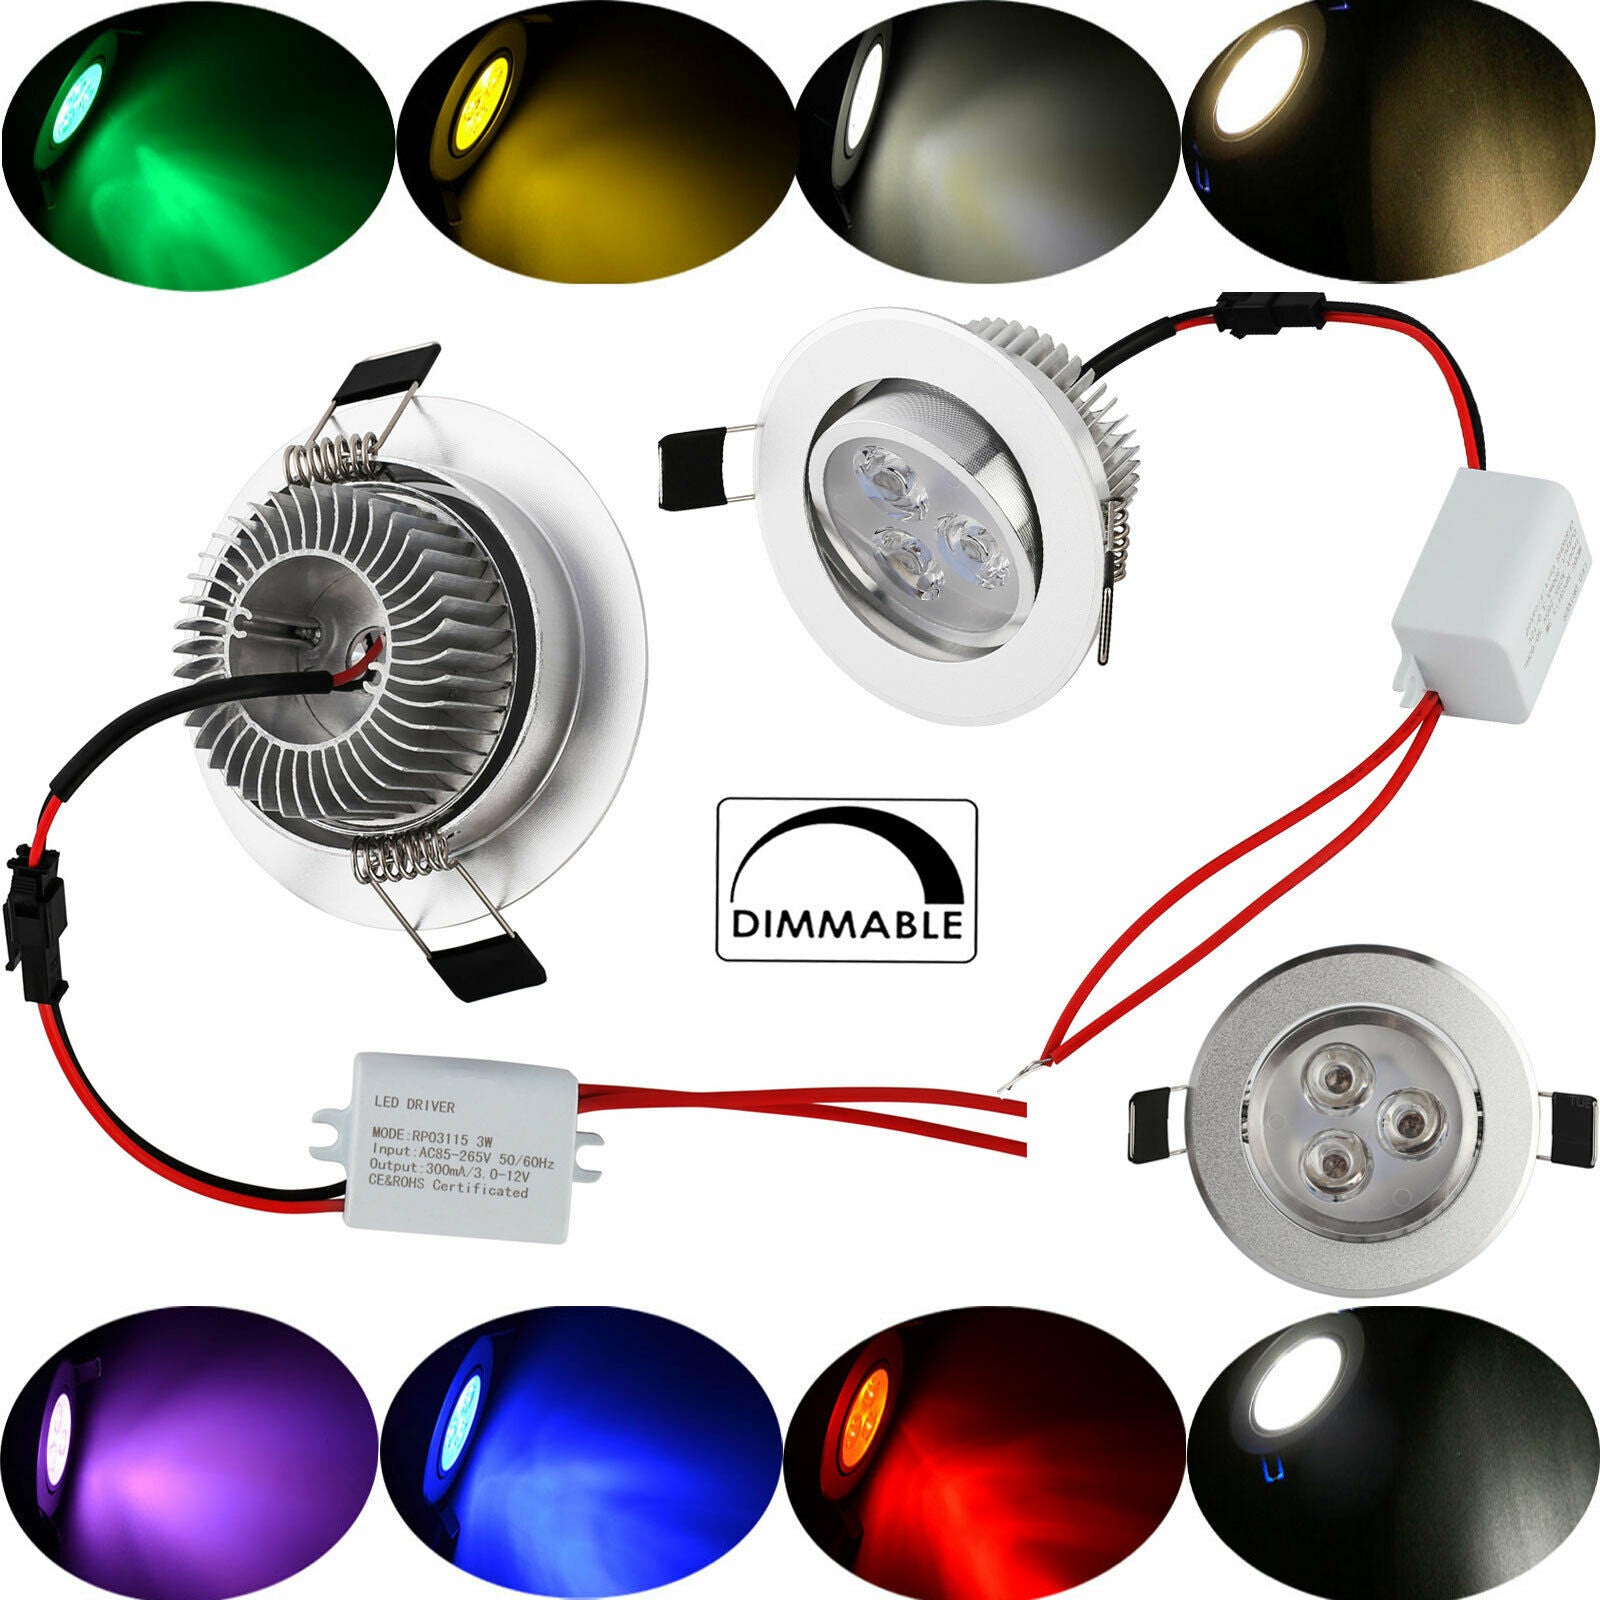 Dimmable 3W Recessed LED Ceiling Downlight Spotlight Lighting 110v 220v Lamps Bulb White Free Driver Colorful Red Yellow Purple